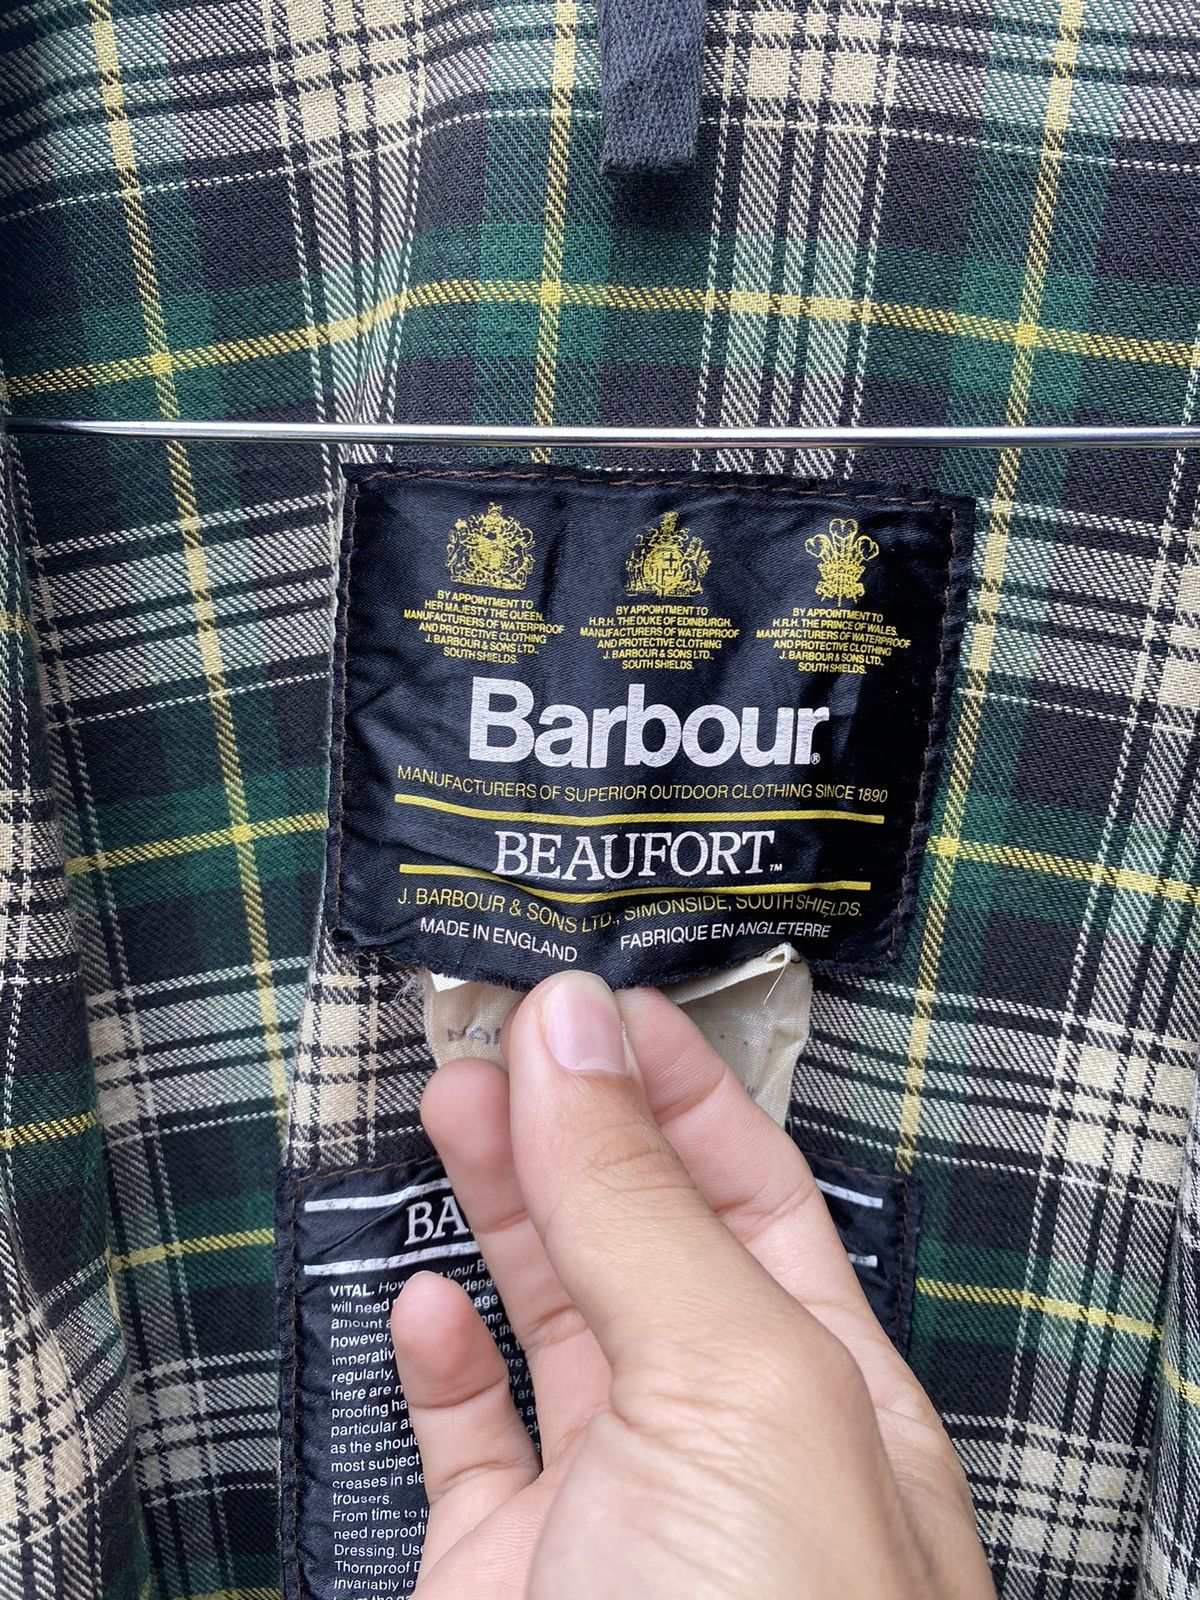 🏴󠁧󠁢󠁥󠁮󠁧󠁿 Barbour Beaufort Waxed Classic Jacket Made In England - 9